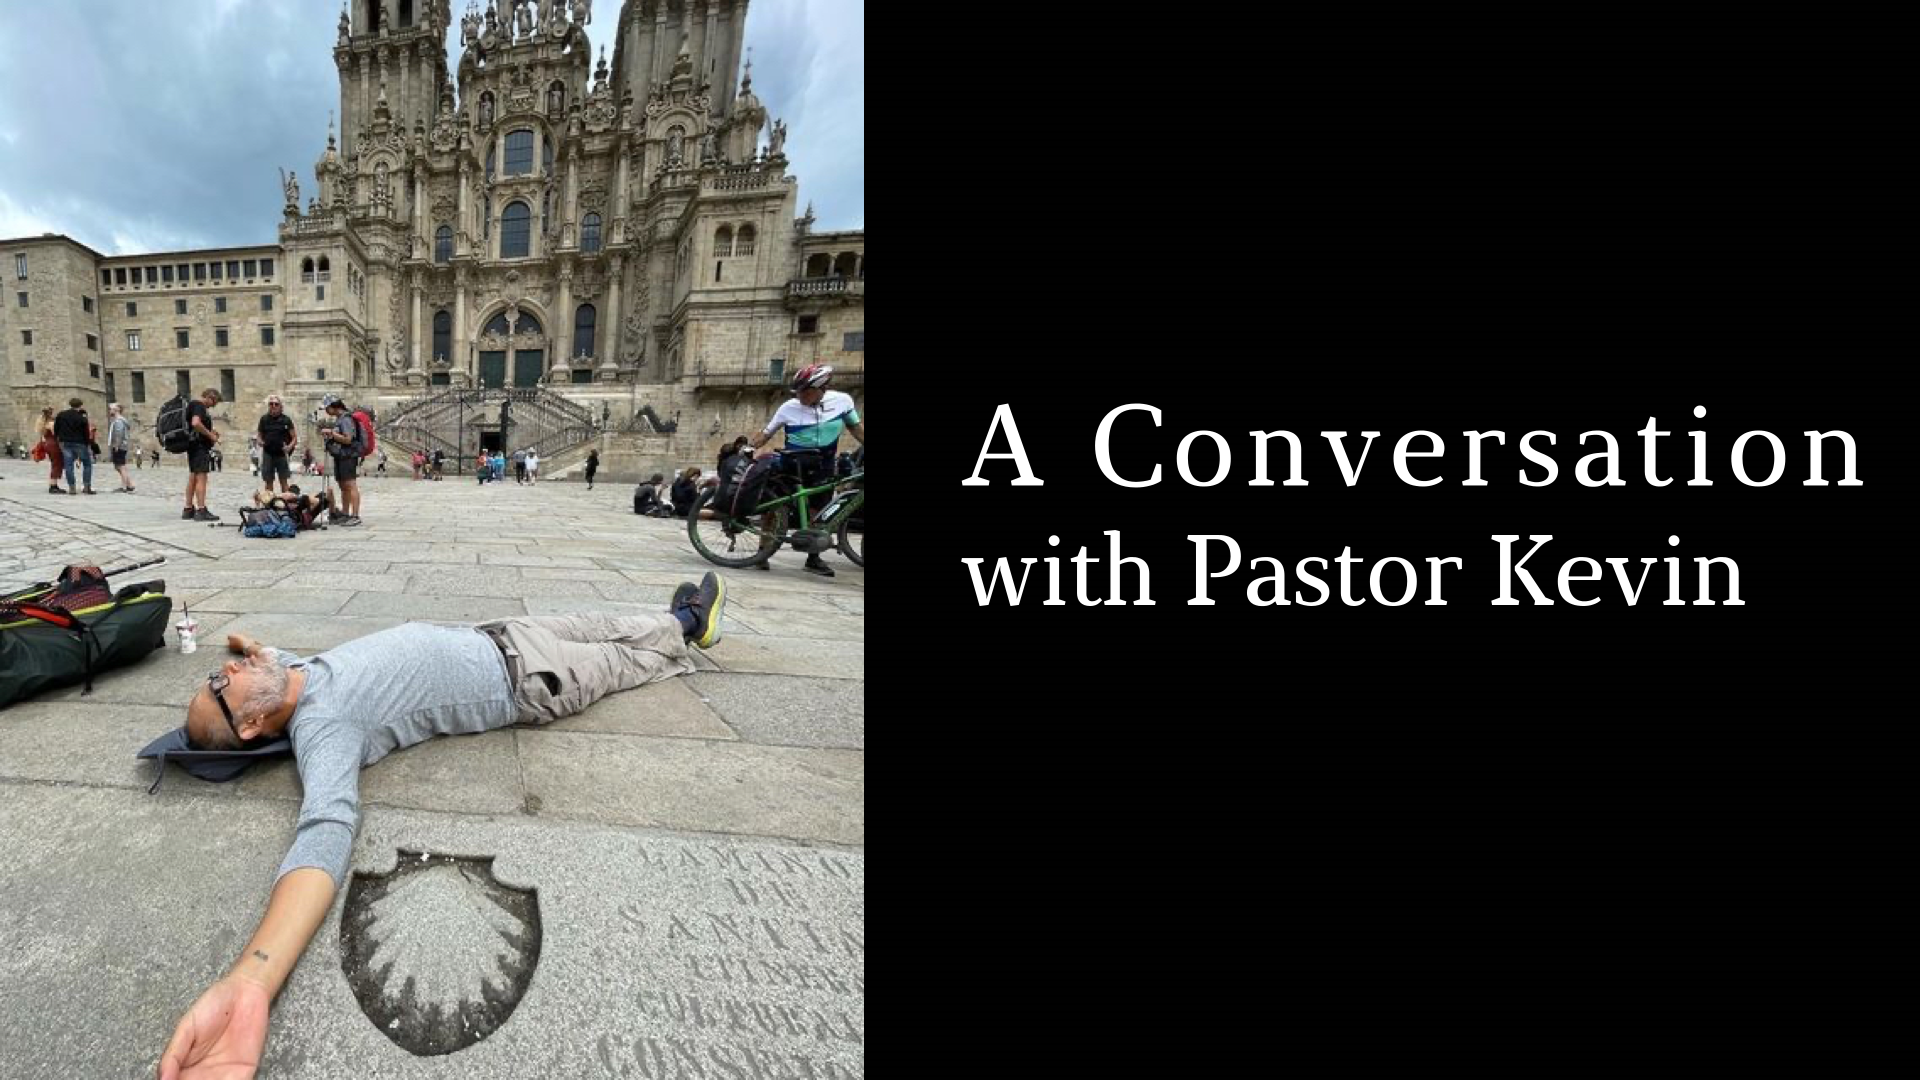 A Conversation with Pastor Kevin